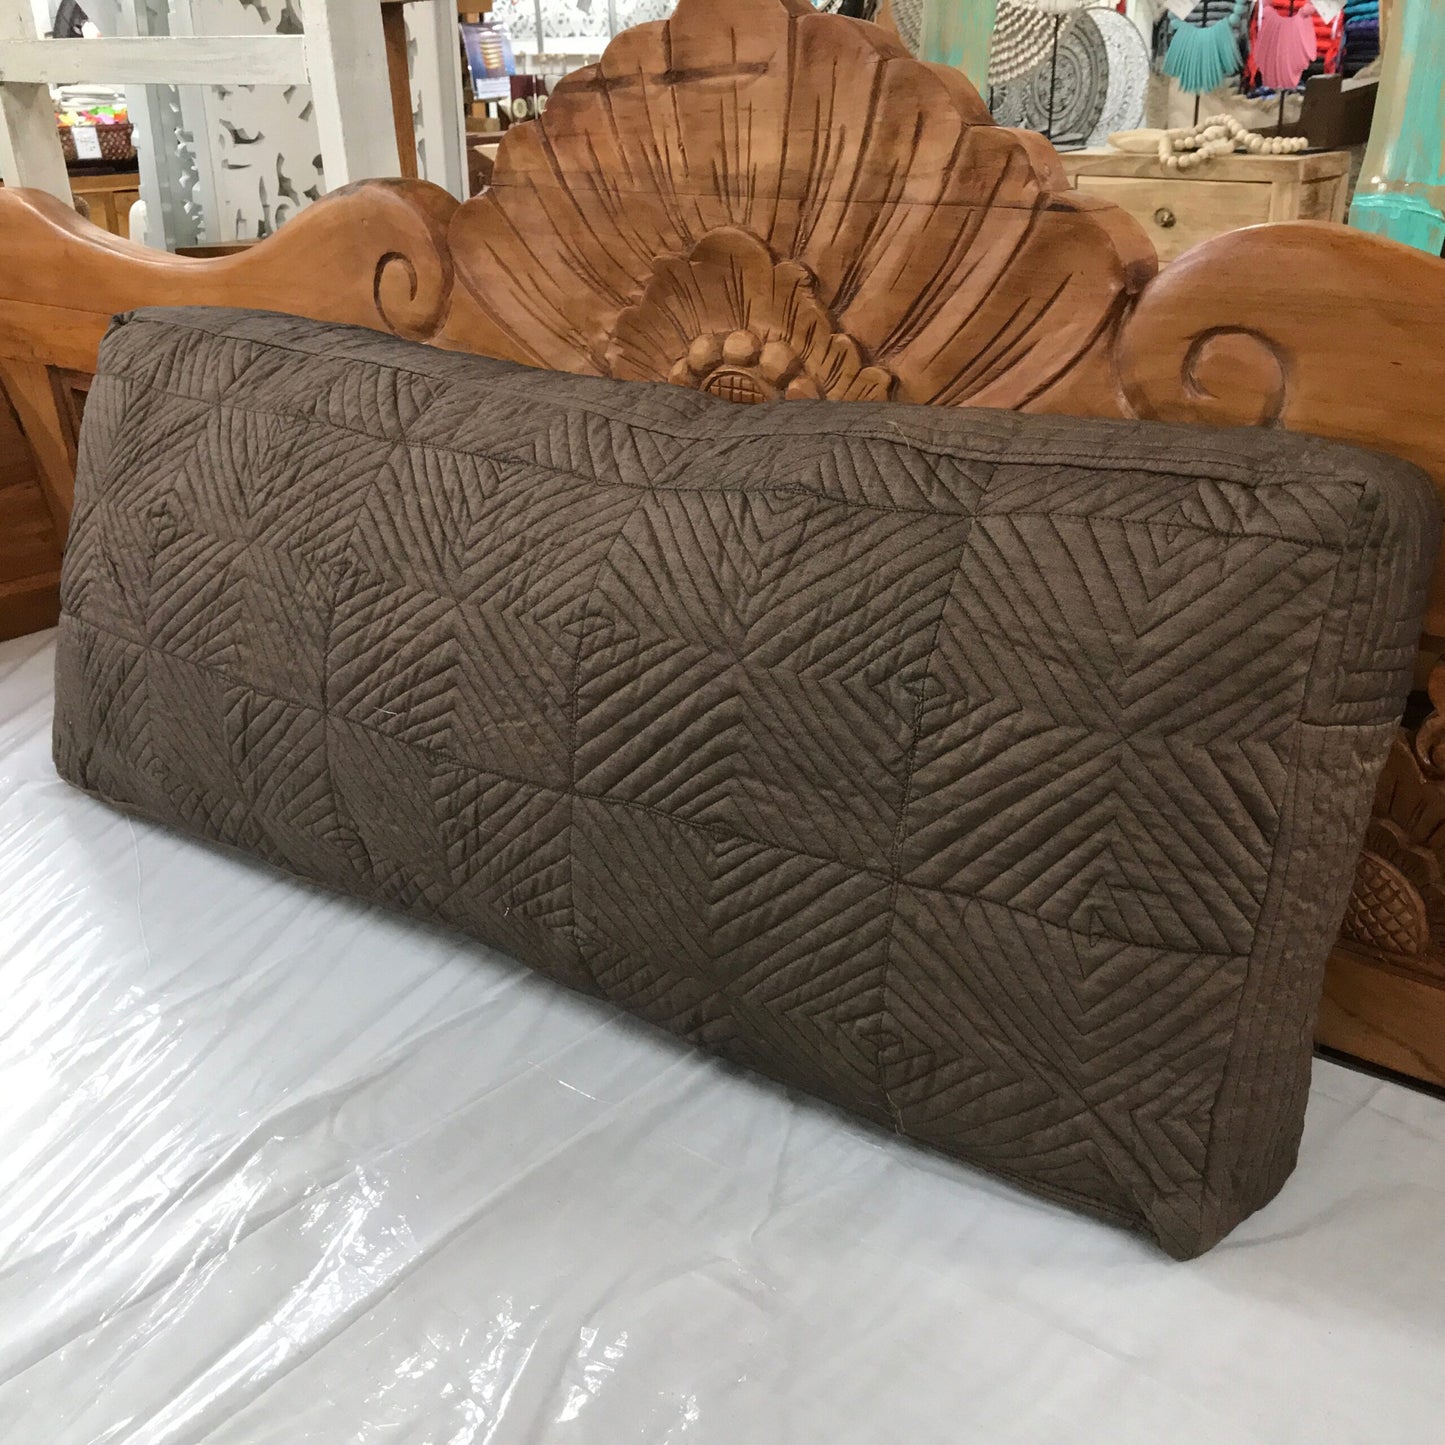 Quilted Geometrical Oblong Cushion Cover 100cm x 40cm